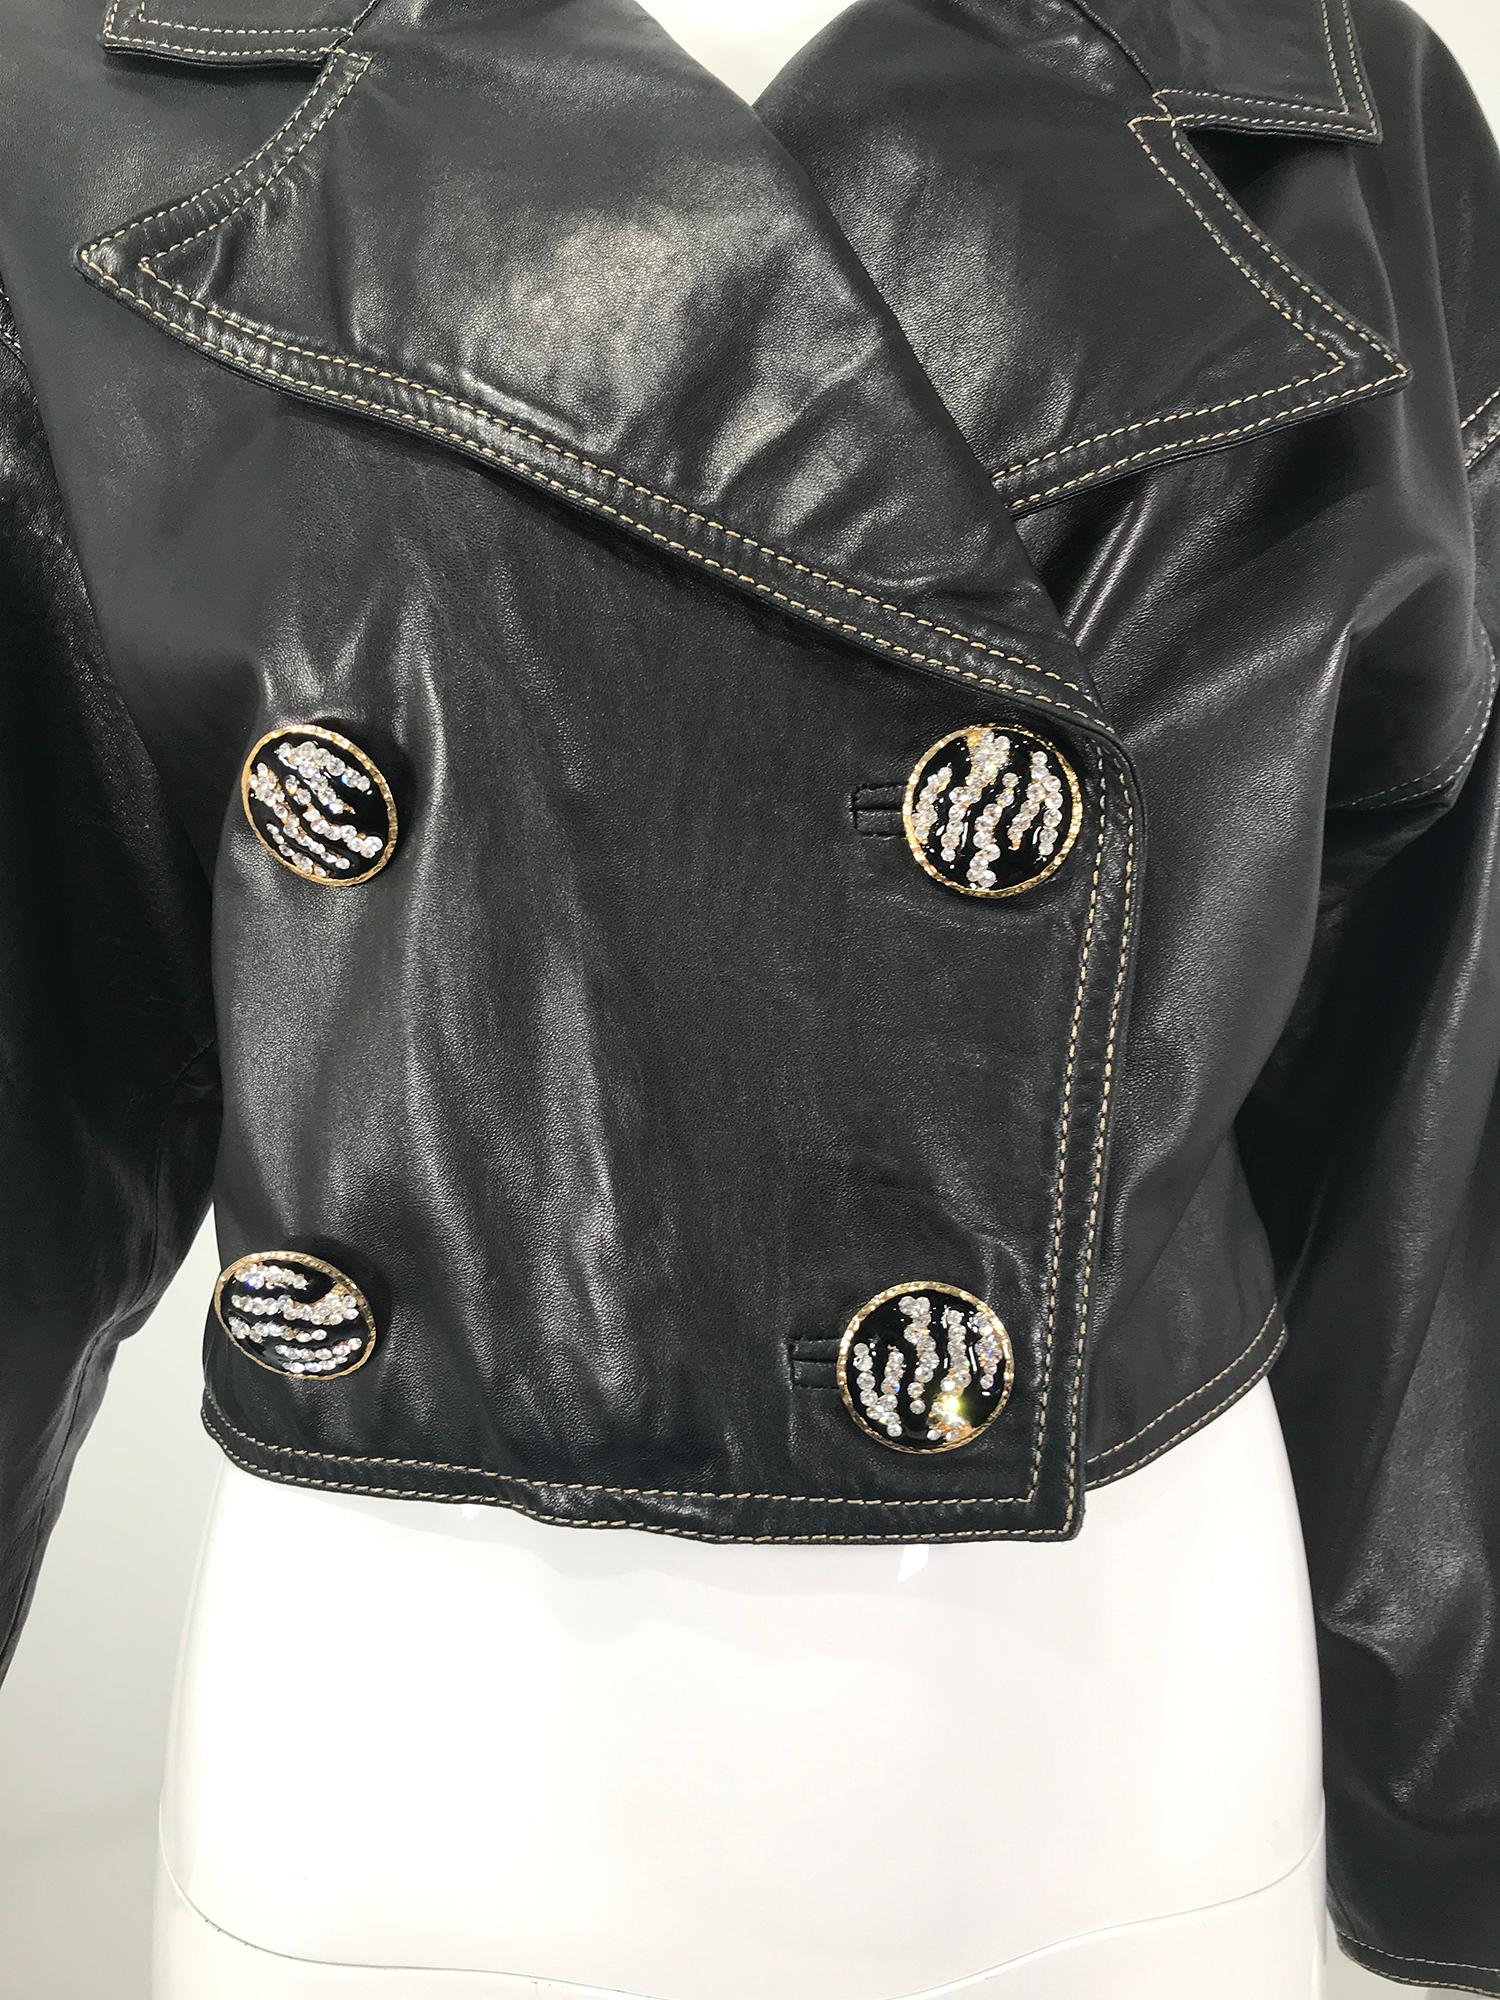 Genny buttery soft black leather bomber jacket with rhinestone buttons and gold stitching, from the 1980s. Double breasted, cropped jacket with wide notched lapels, the large buttons are gold with black enamel and rhinestones. Dropped shoulder seam,